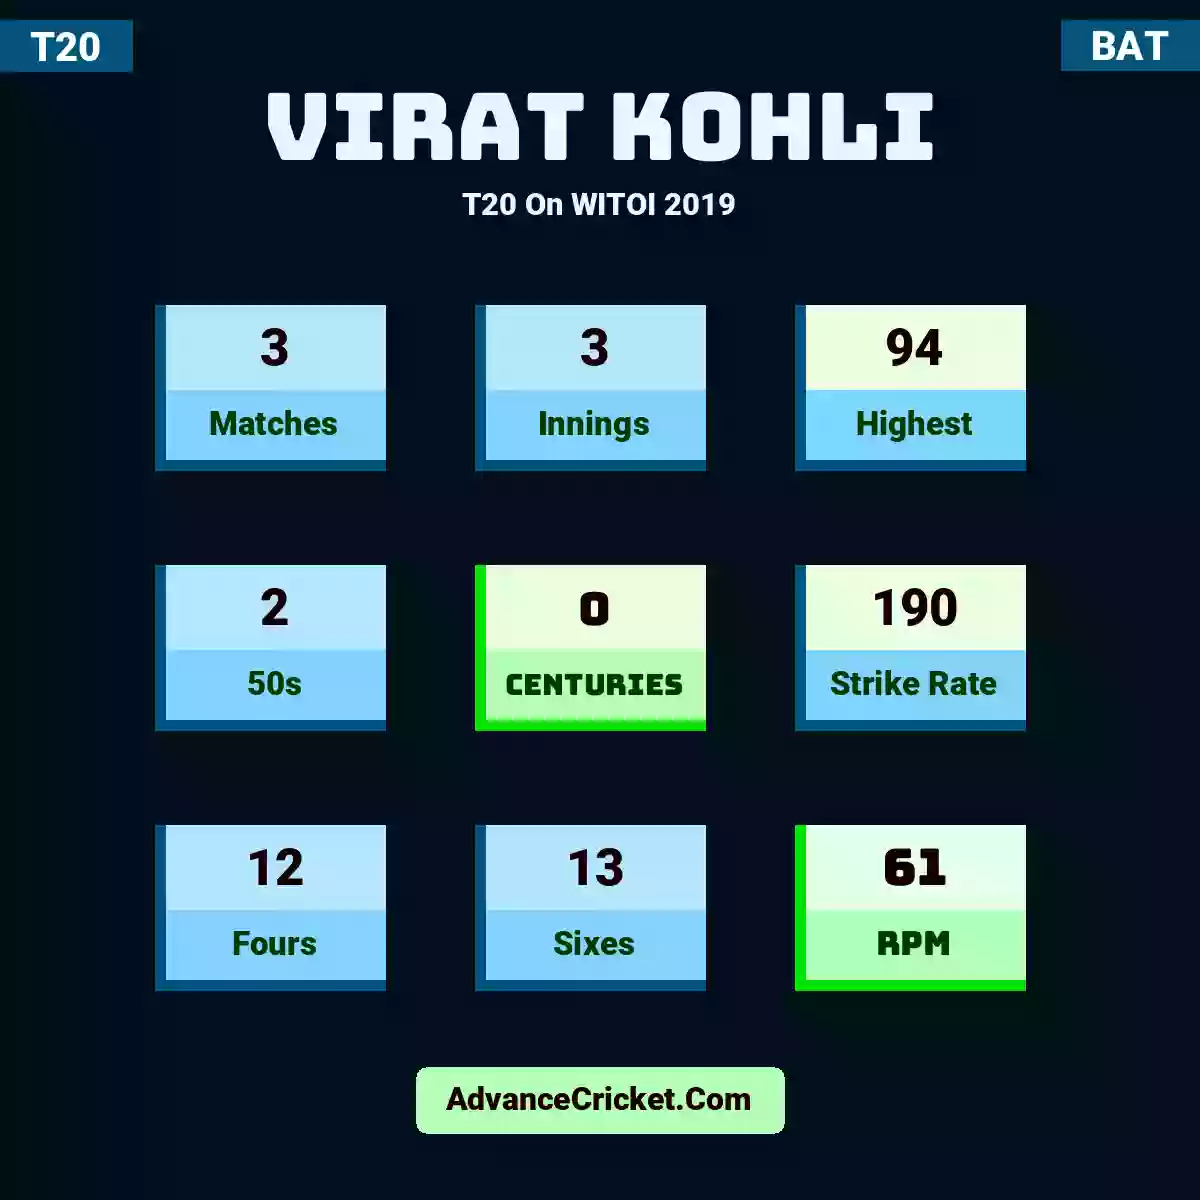 Virat Kohli T20  On WITOI 2019, Virat Kohli played 3 matches, scored 94 runs as highest, 2 half-centuries, and 0 centuries, with a strike rate of 190. V.Kohli hit 12 fours and 13 sixes, with an RPM of 61.